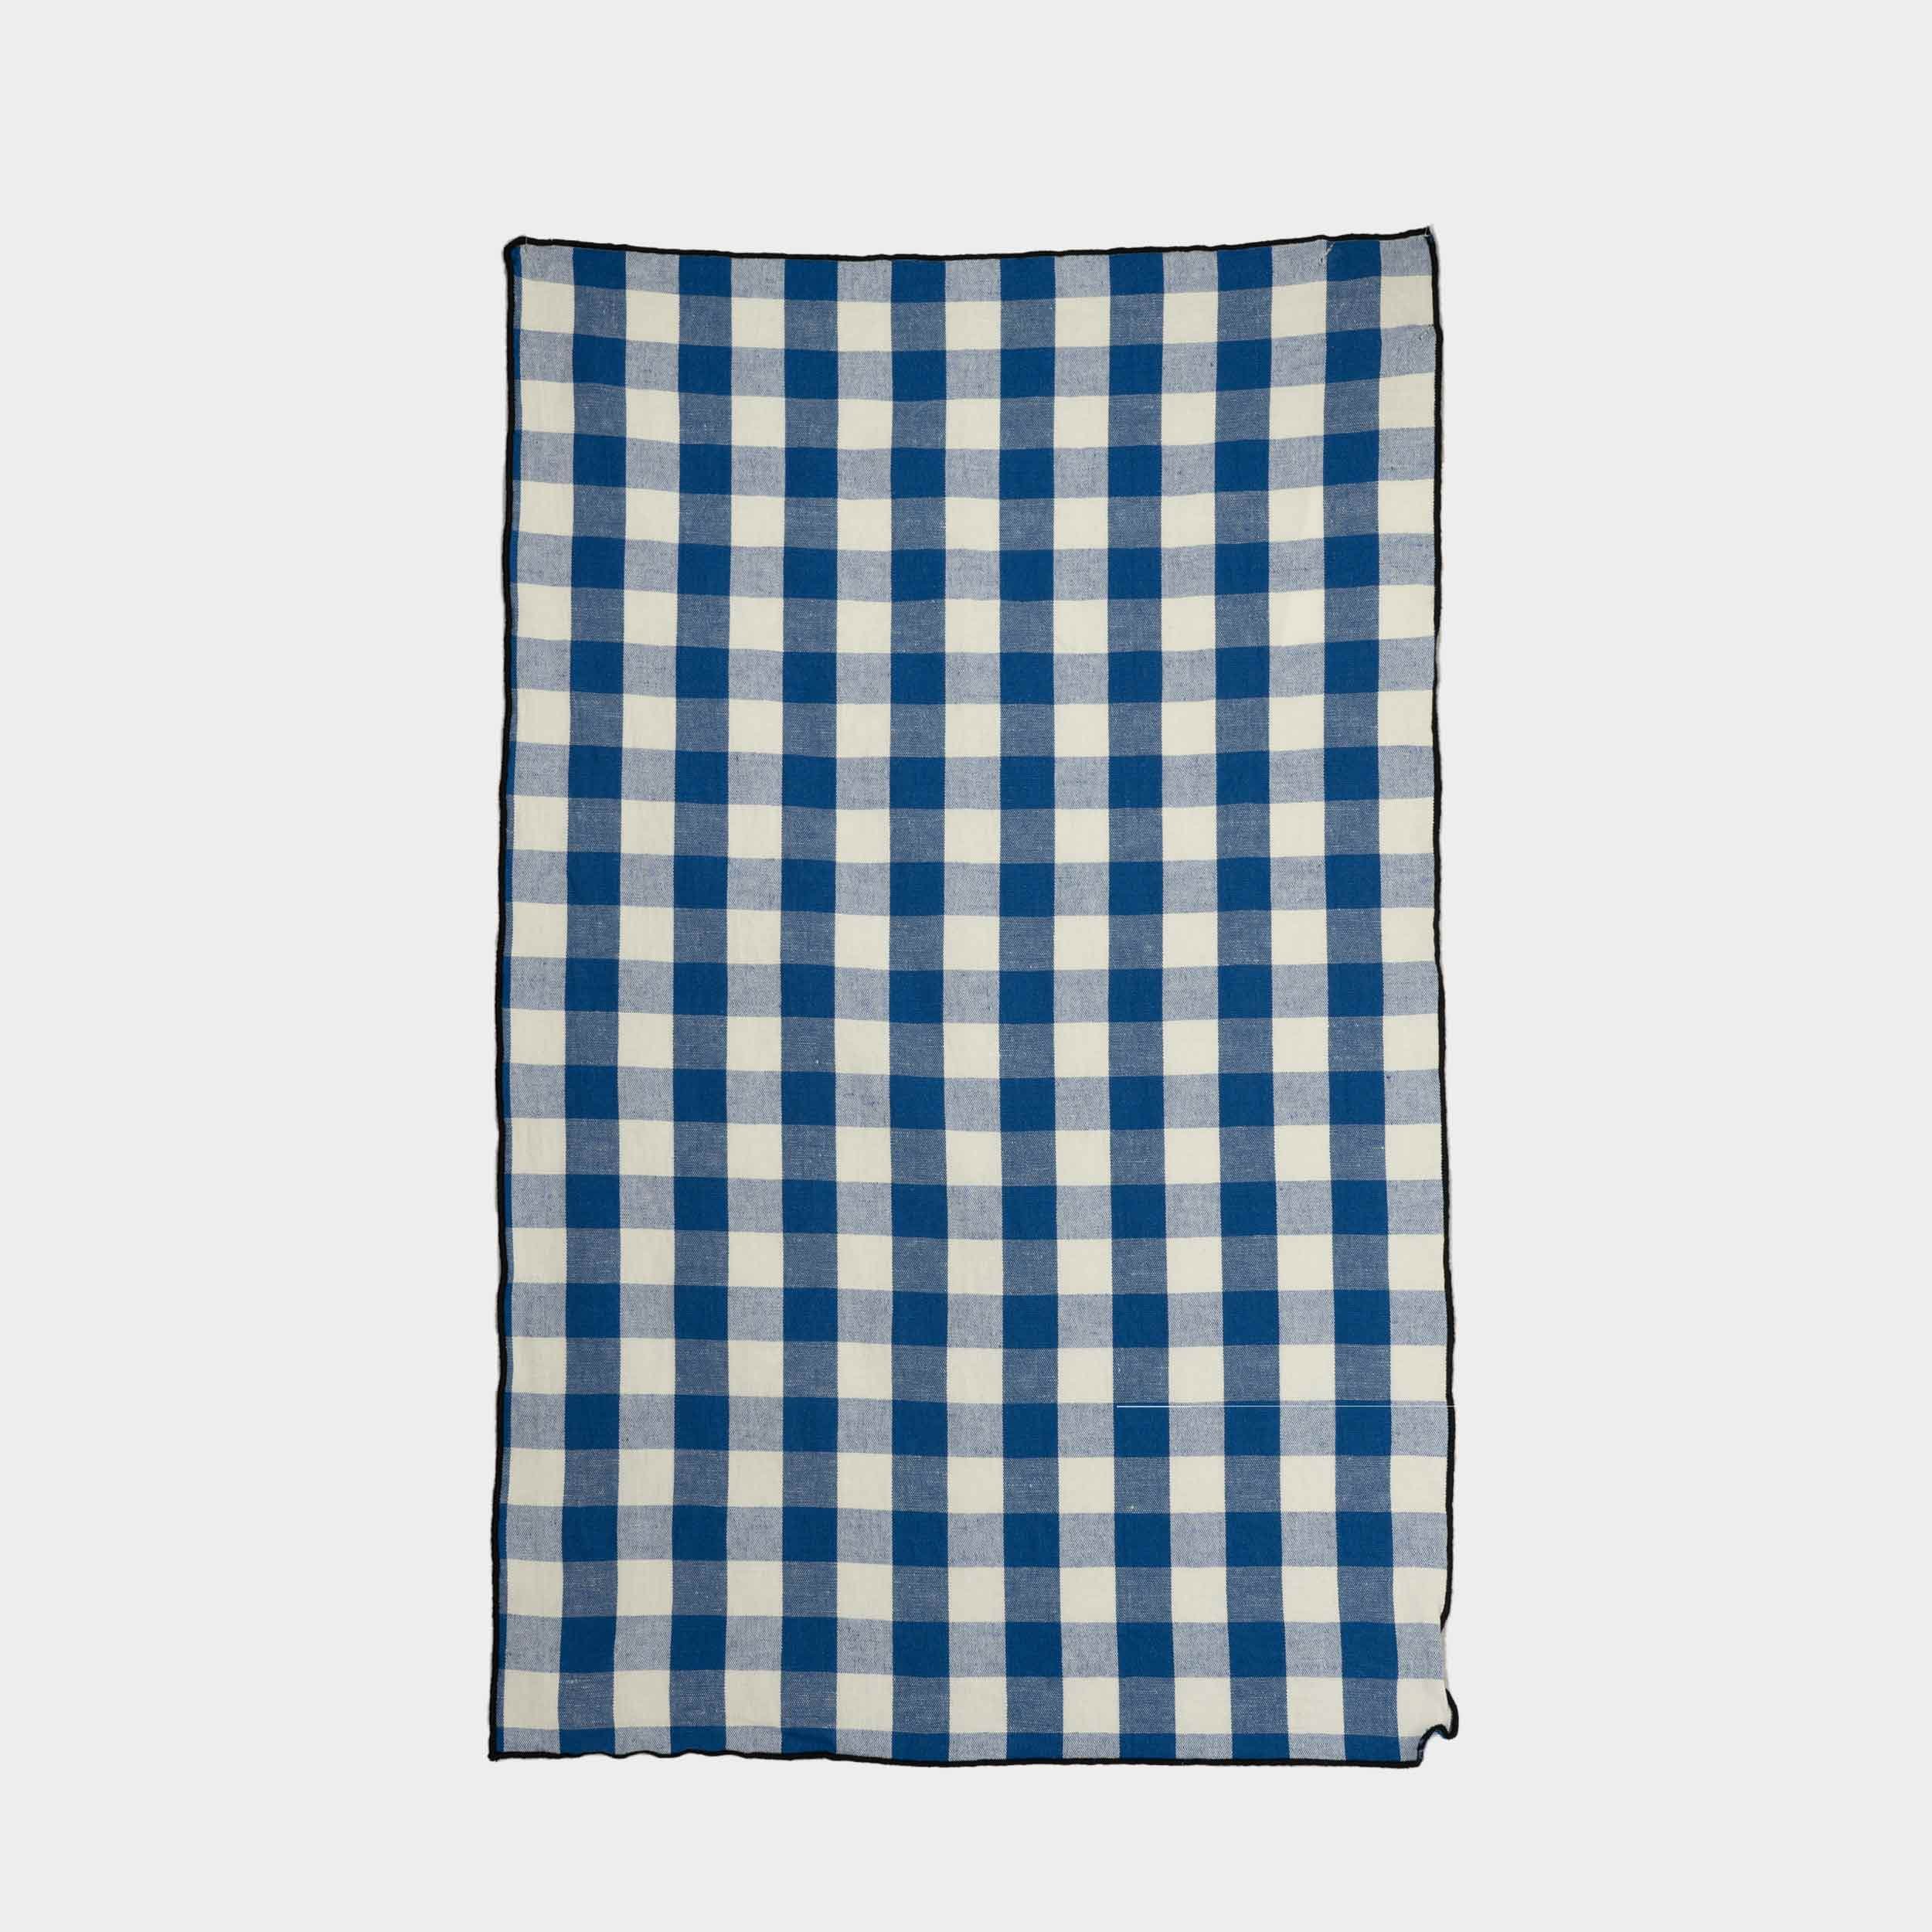 http://images.squarespace-cdn.com/content/v1/5ff5ad8960aa3e486998f529/1655819688698-38UIOZZ980LY5AJCCF9X/gingham-french-linen-towel-blue-with-black-edge-1.jpg